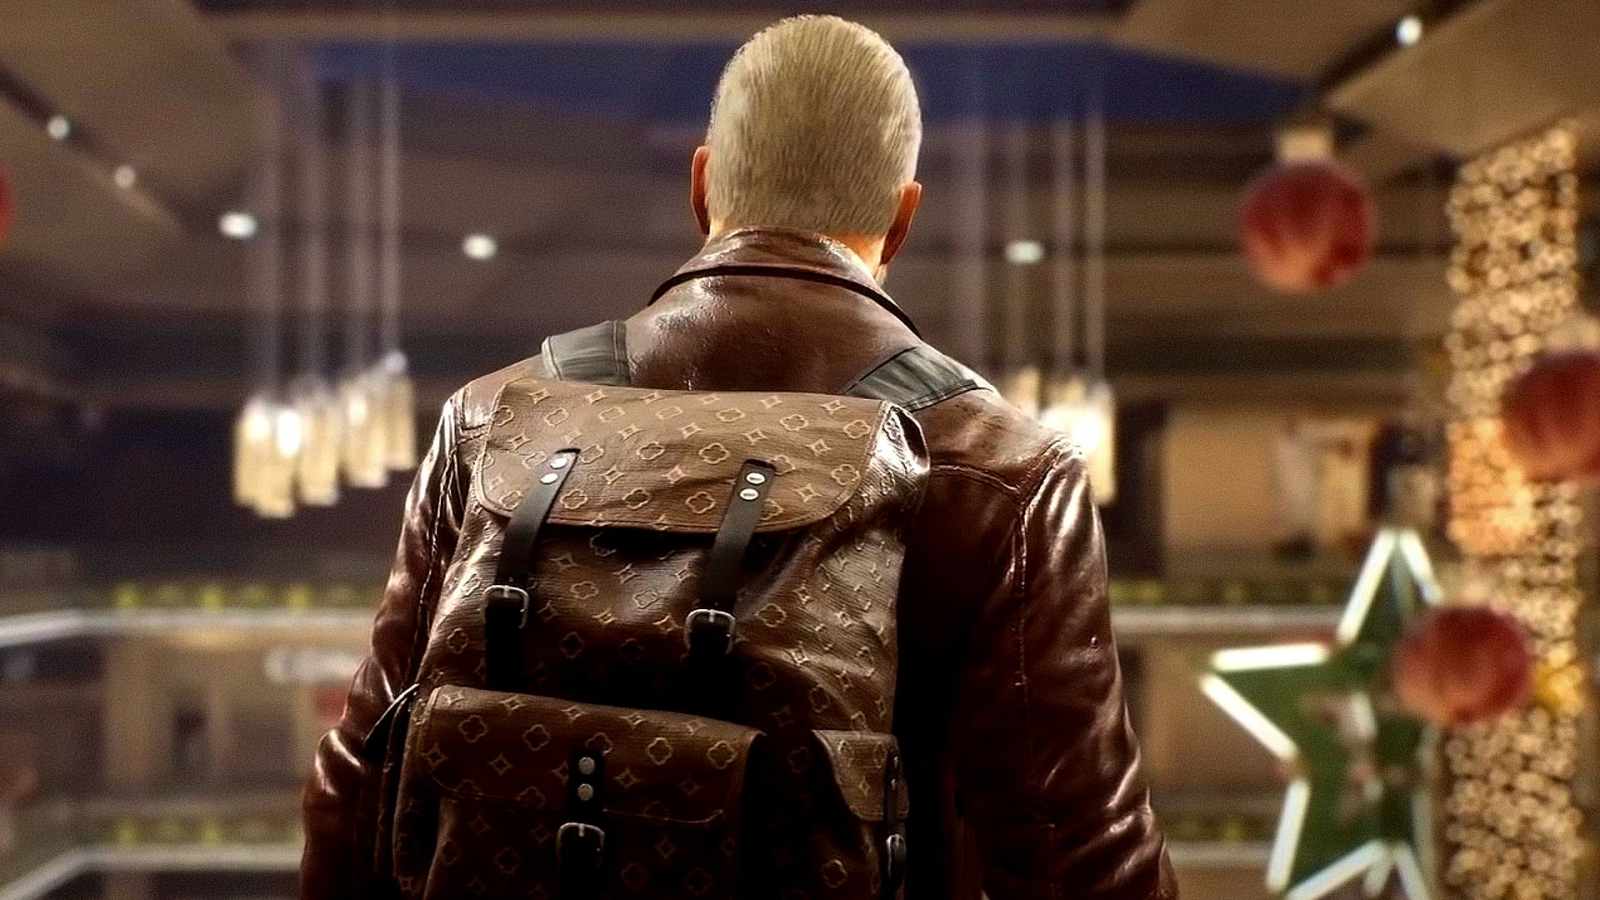 DayZ takes another shot at The Day Before with new sale - Dexerto